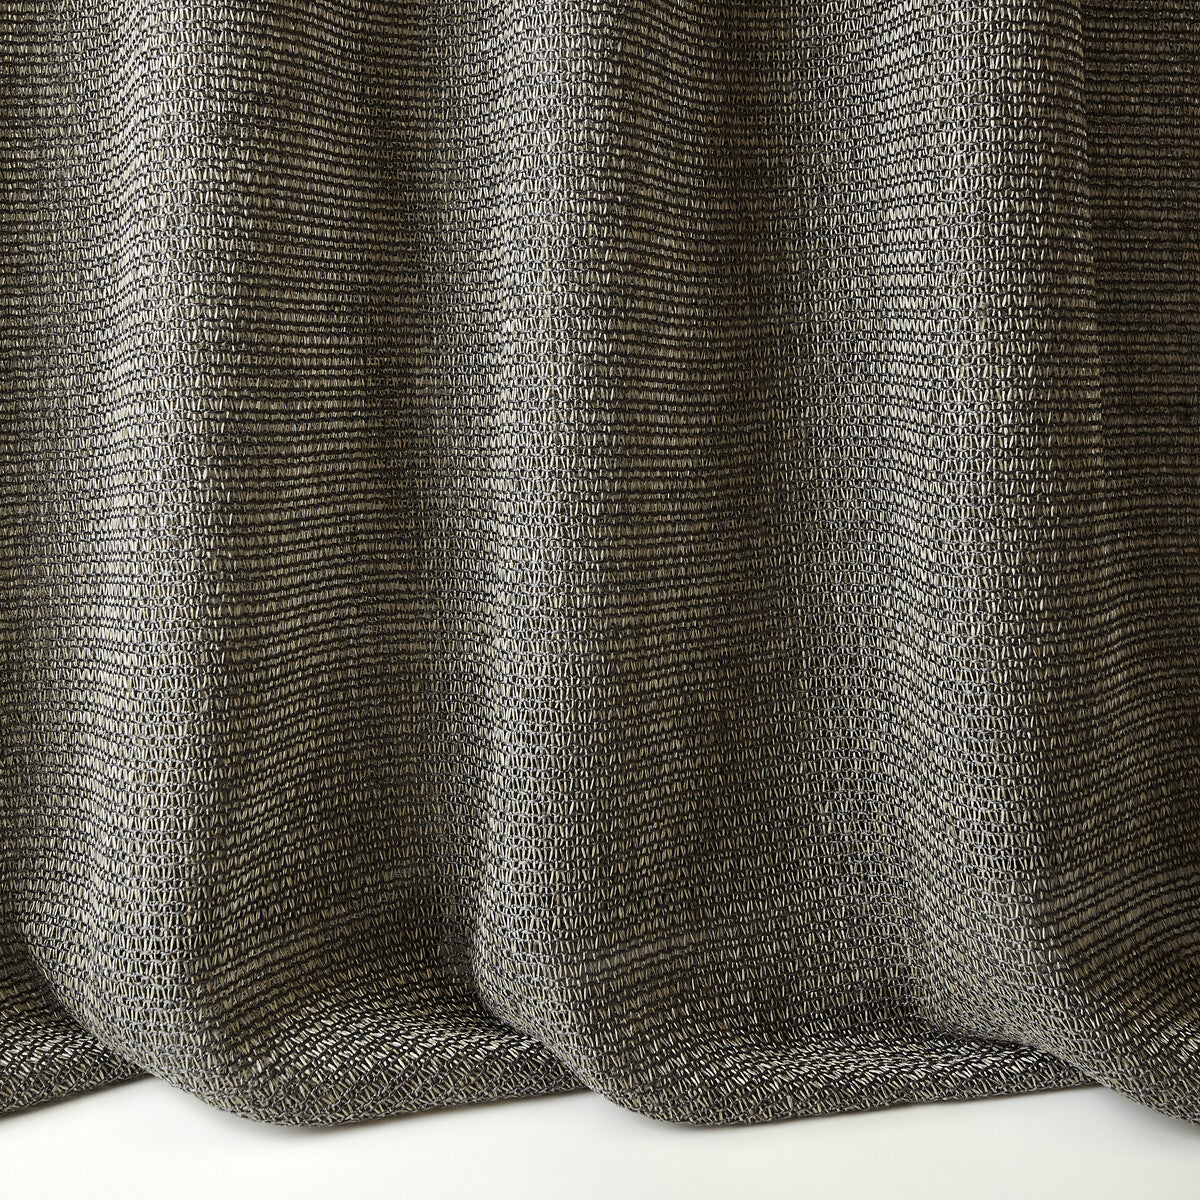 Hidra fabric in 9 color - pattern LZ-30215.09.0 - by Kravet Design in the Lizzo collection